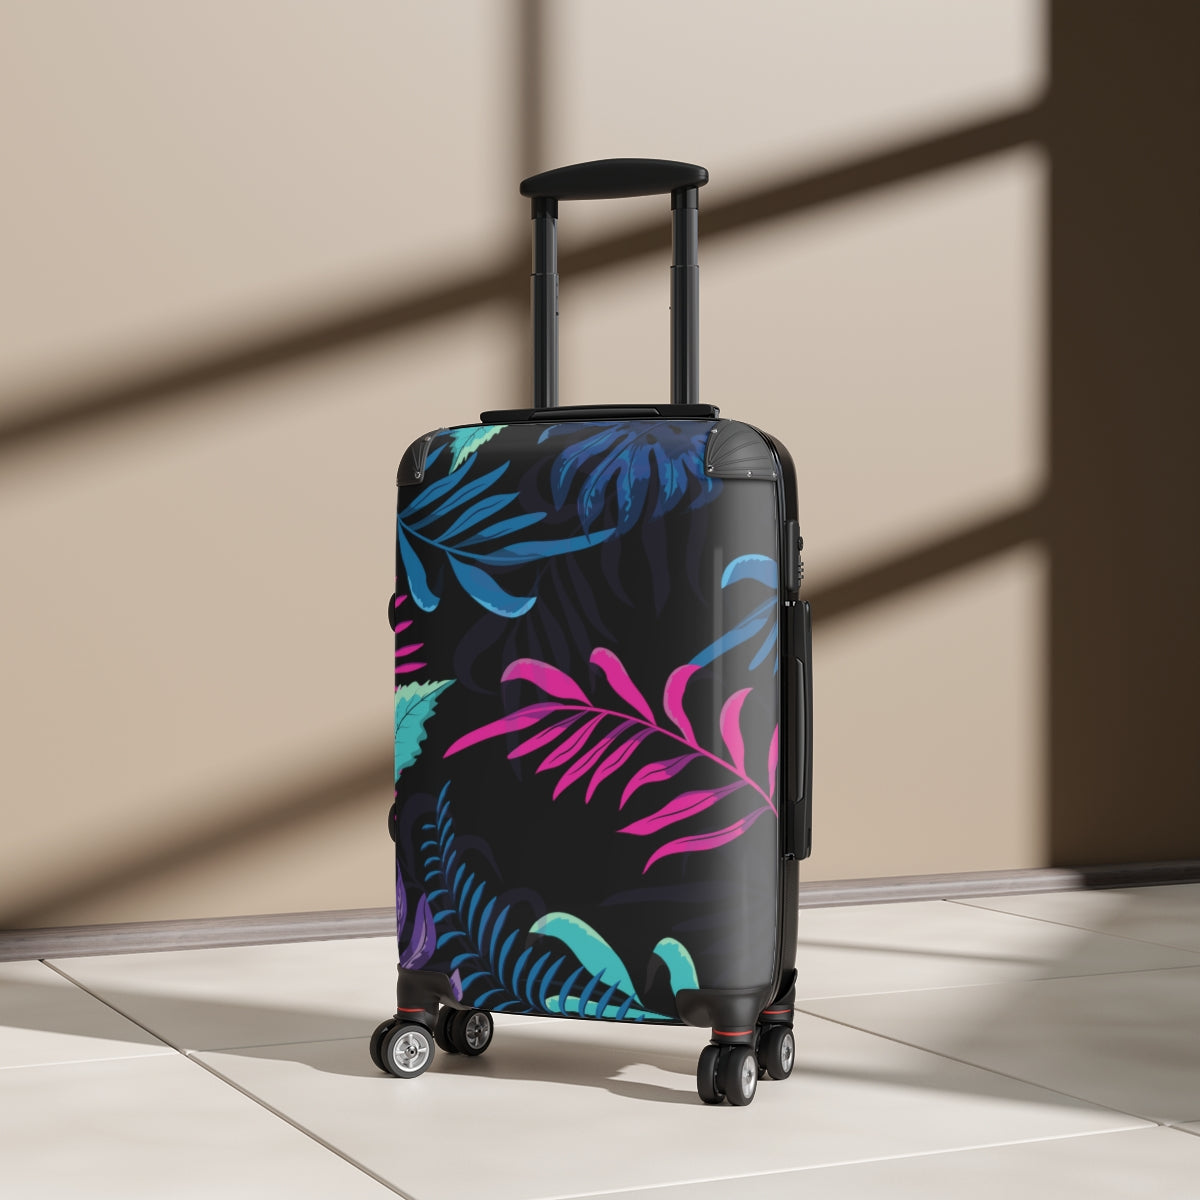 BEST CARRY-ON LUGGAGE SET, TROPICAL SUMMER DESIGN BY ARTZIRA, CABIN SUICASE FOR GIRLS, WOMEN, GIFT FOR BRIDESMAIDS, GIFT FOR MOTHERS, DOUBLE WHEELED SPINNER